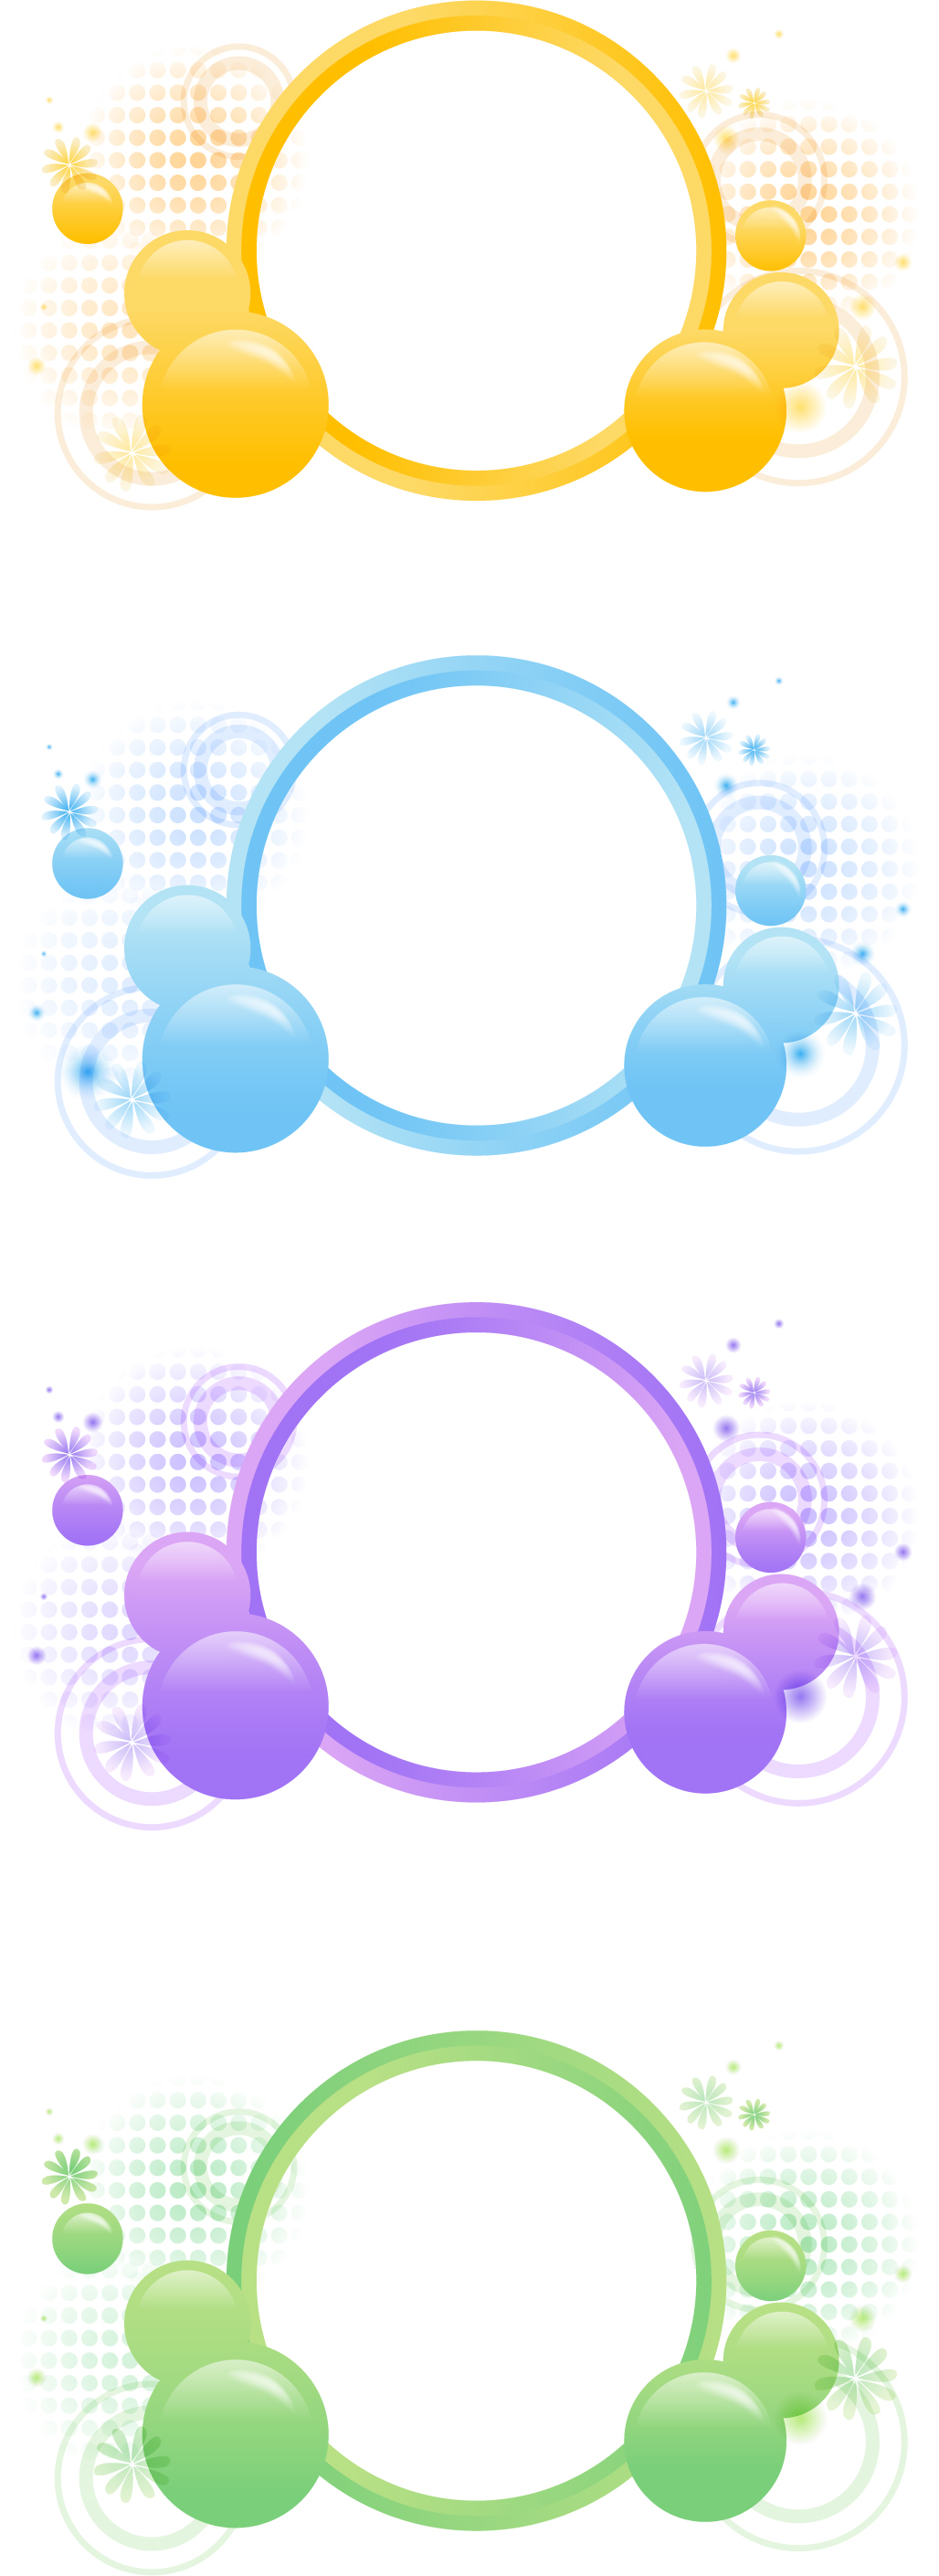 vector clipart free downloads - photo #8